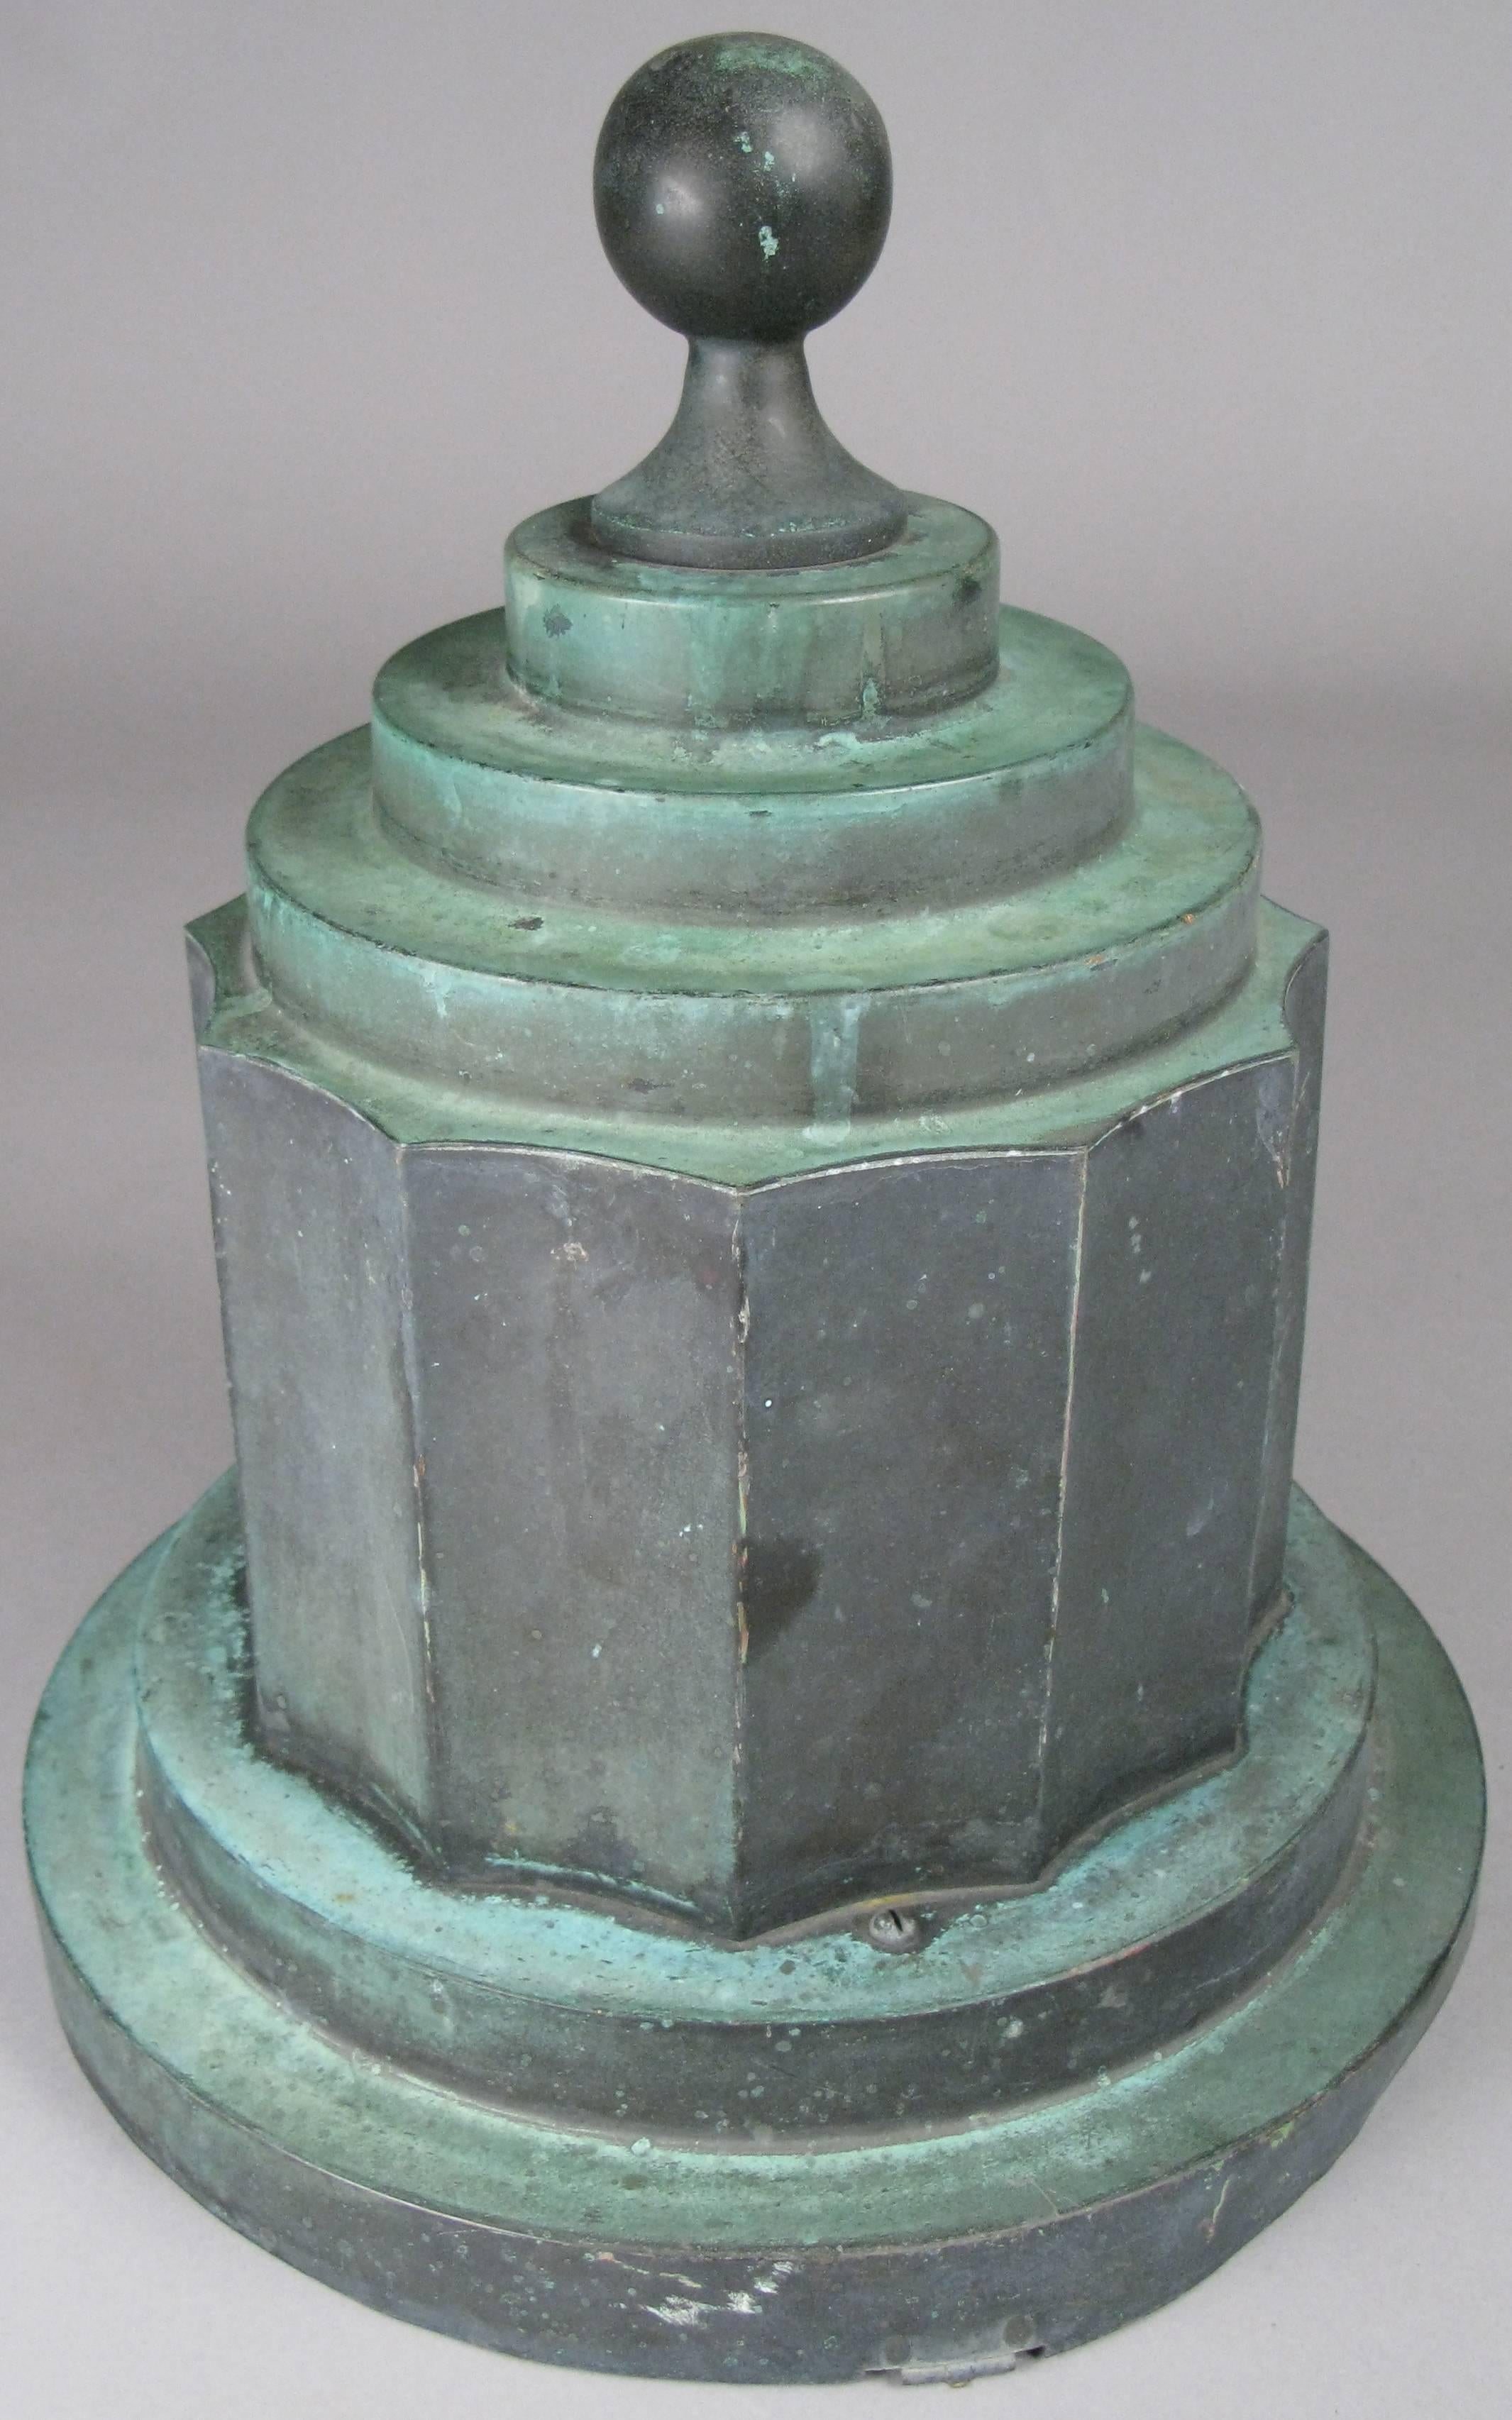 A large antique Art Deco copper finial with an outstanding patinated finish. Likely used as the top of a large lantern as seems to have had a hinge on one side and has a chain inside. Beautiful form and finish.